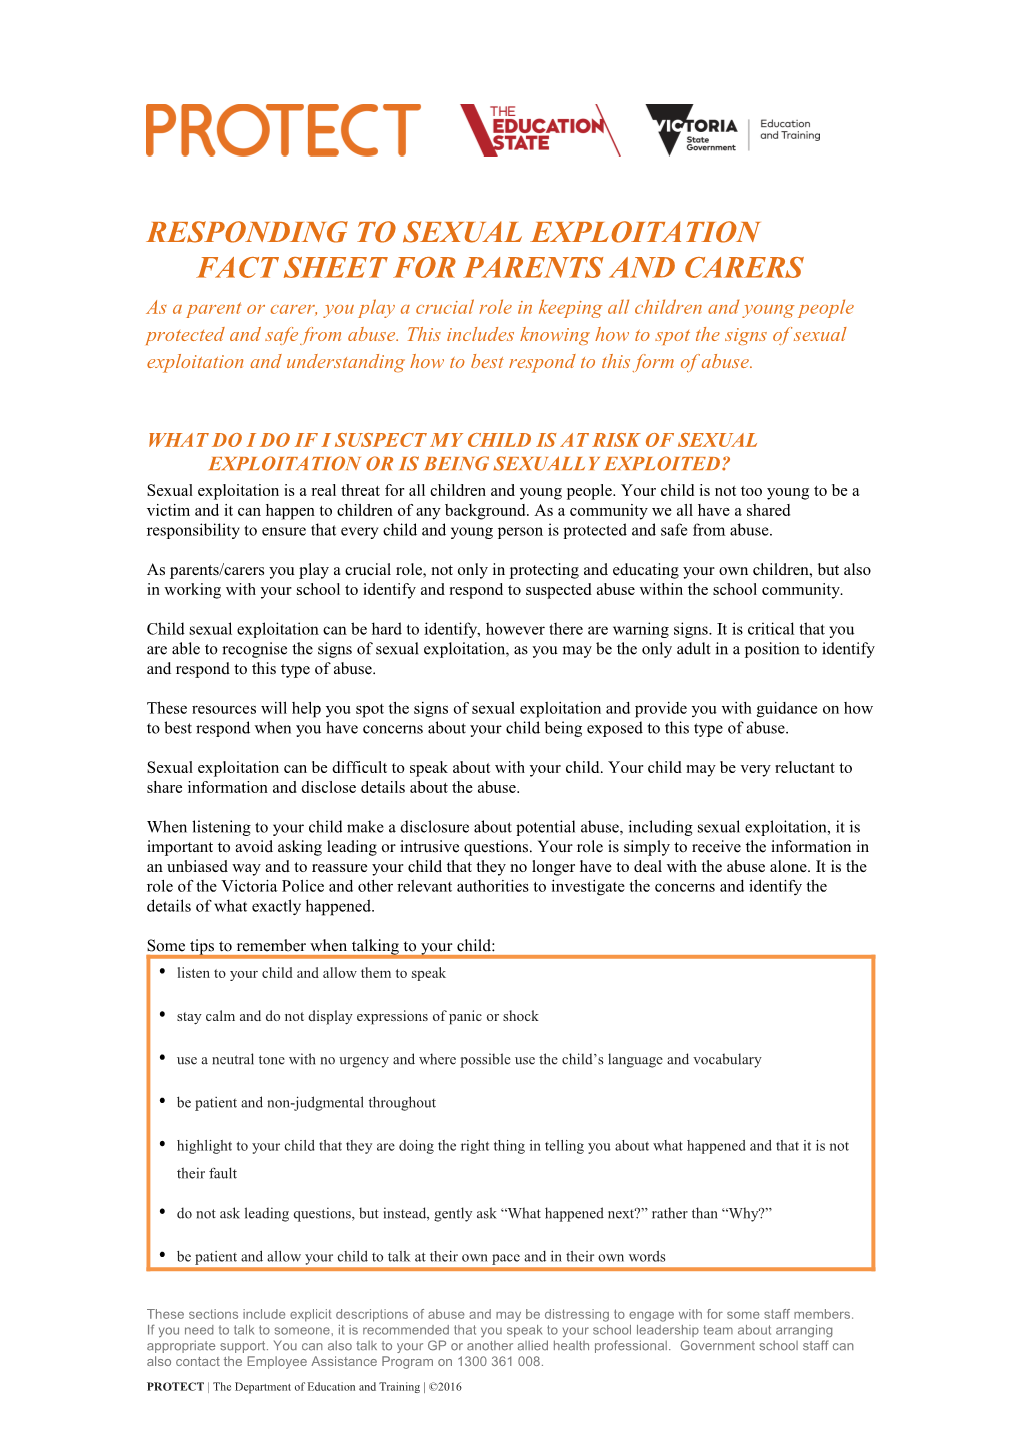 Responding to Sexual Exploitation Fact Sheet for Parents and Carers